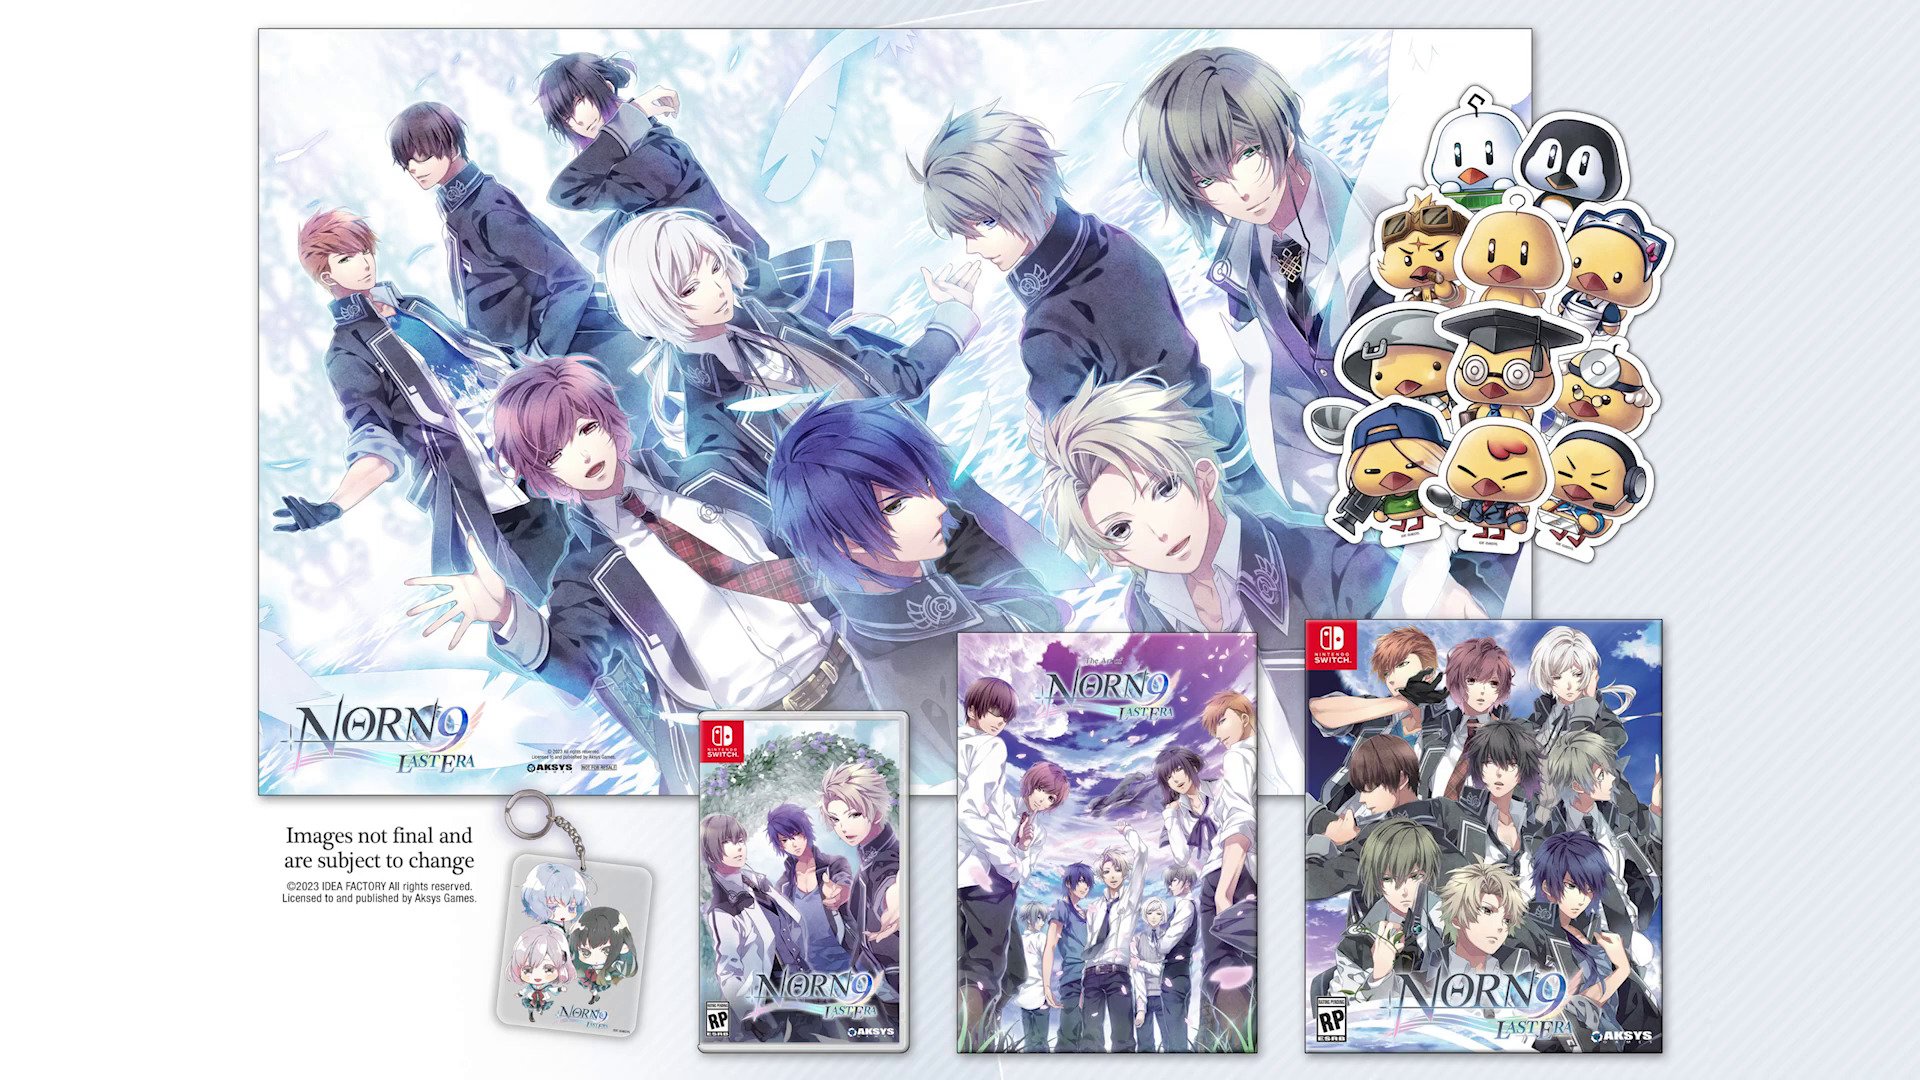 #
      Norn9: Last Era launches August 24 in the west